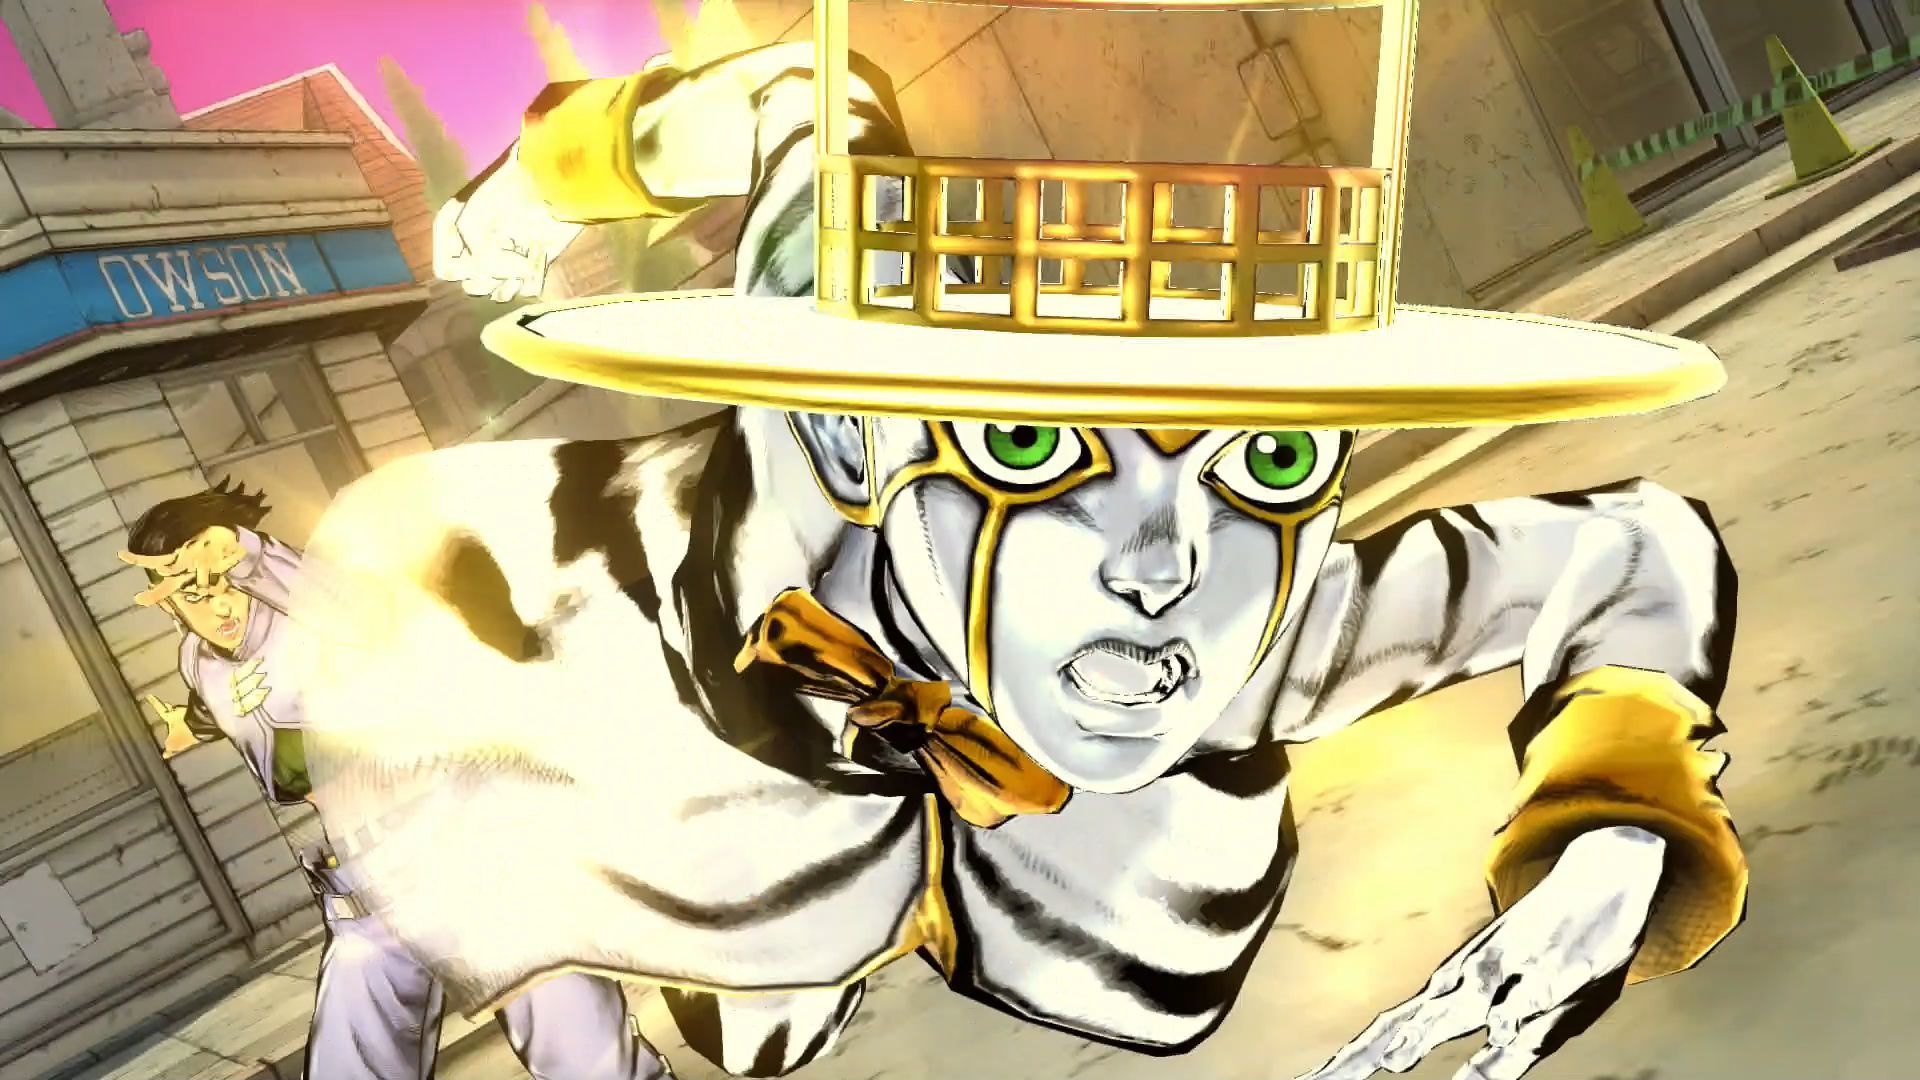 Jojo's Bizarre Adventure: Eyes of Heaven Launches with a Hype Trailer